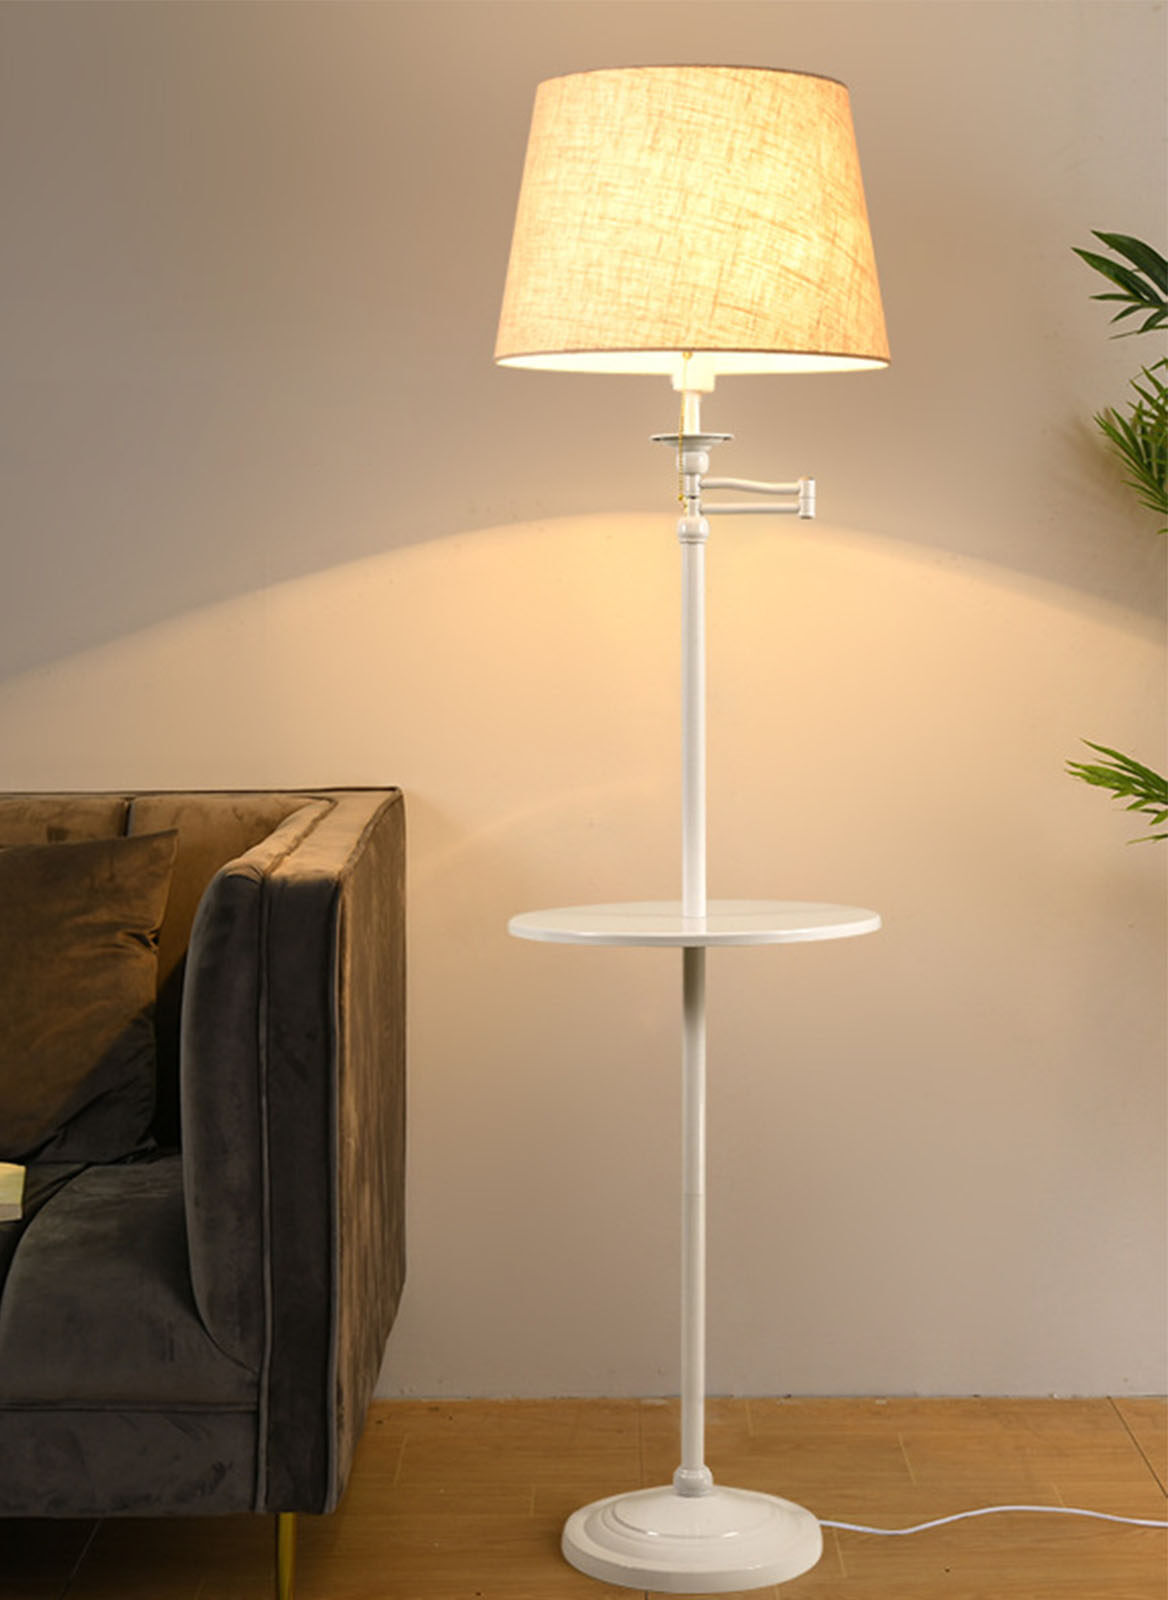 Modern Bedroom Bedside Floor Lamp with Remote Control Dimming and Color Adjustment 12W